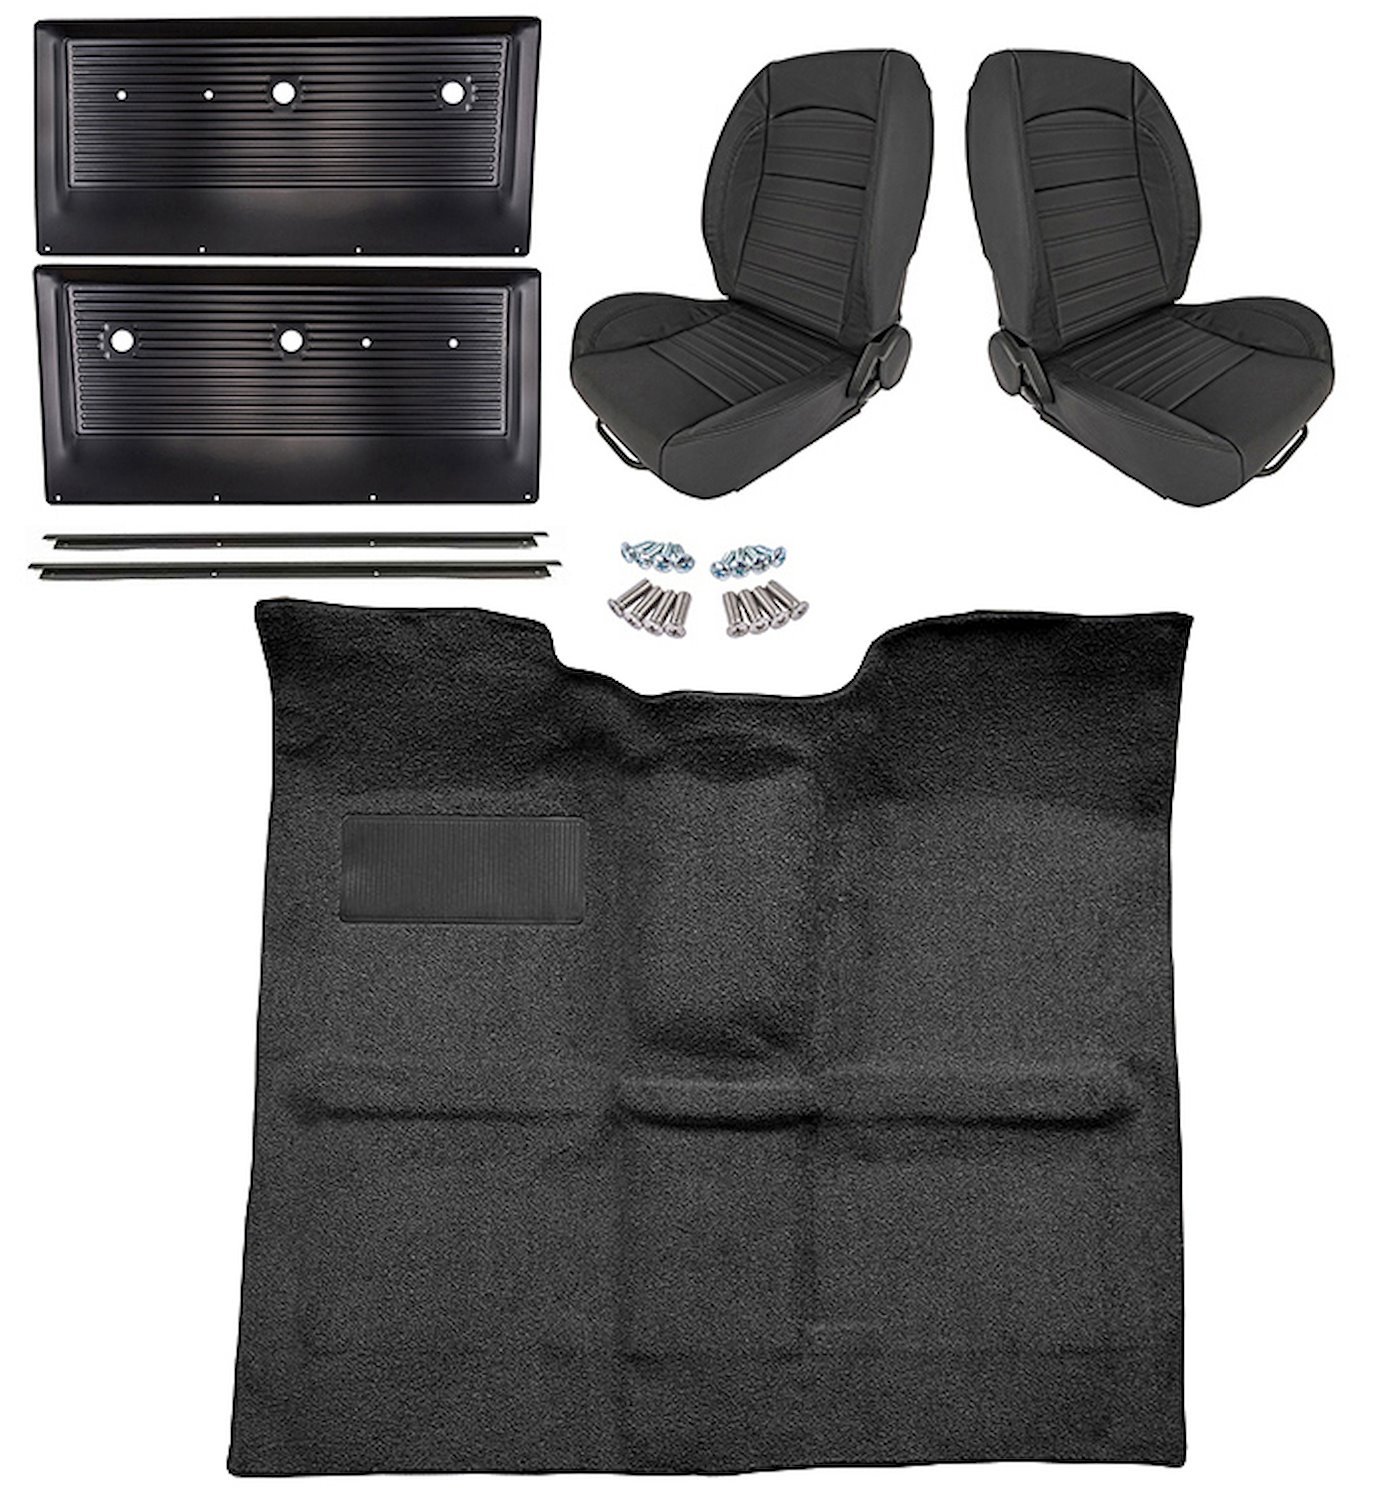 Black Interior Kit w/Low-Back Buckets for 1967-1972 GM C Series Regular Cab Truck w/o Gas Tank in Cab, TH400